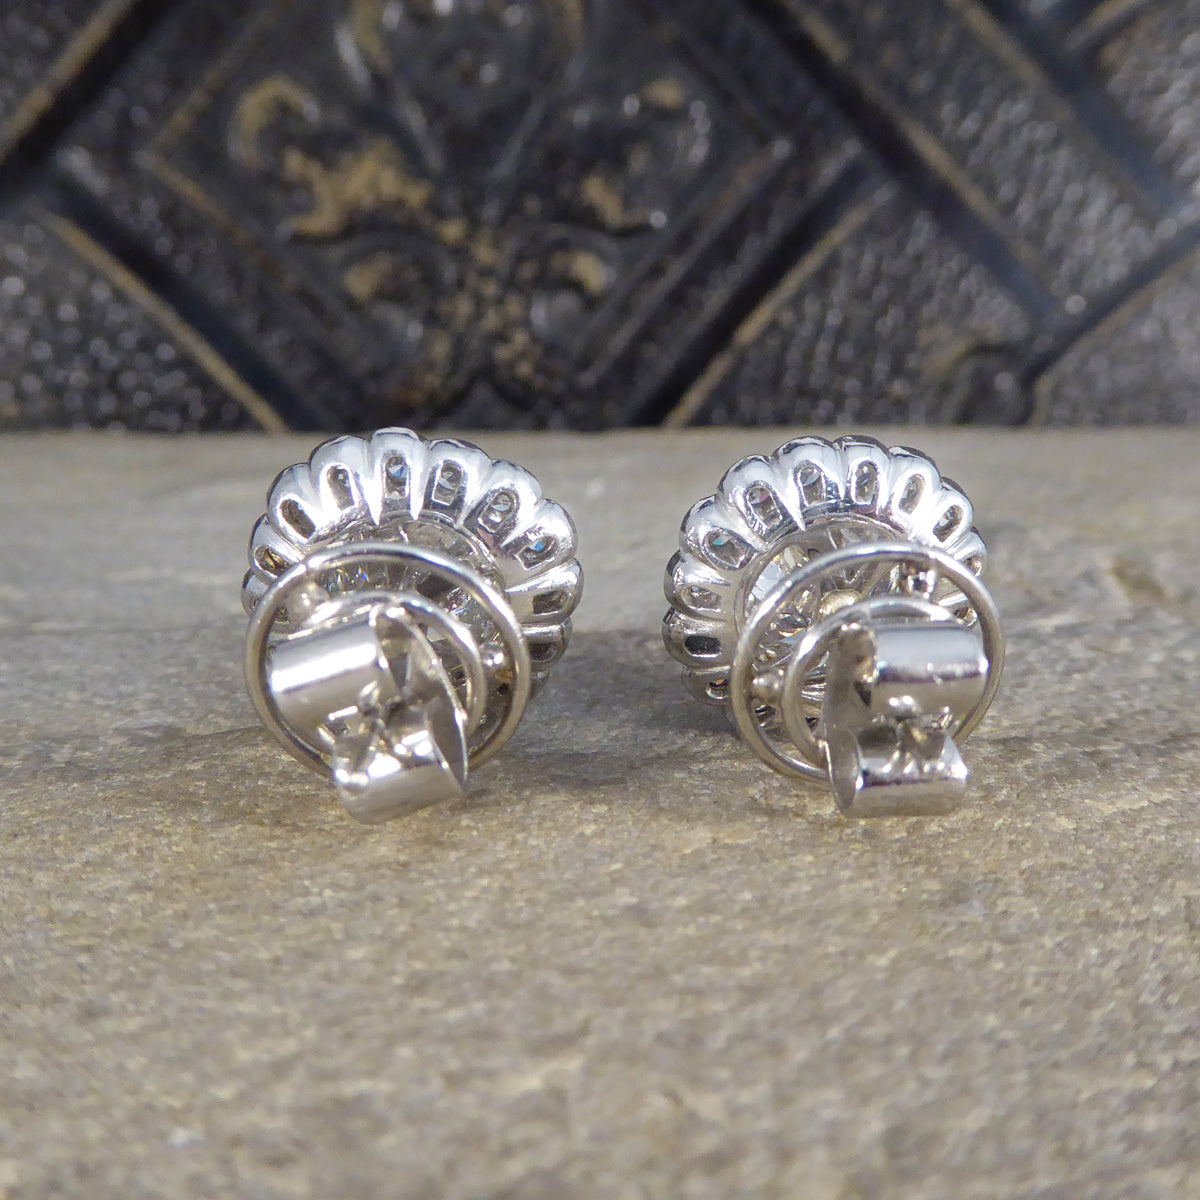 1940's Old Cushion Cut Daisy Cluster Stud Earrings in Platinum